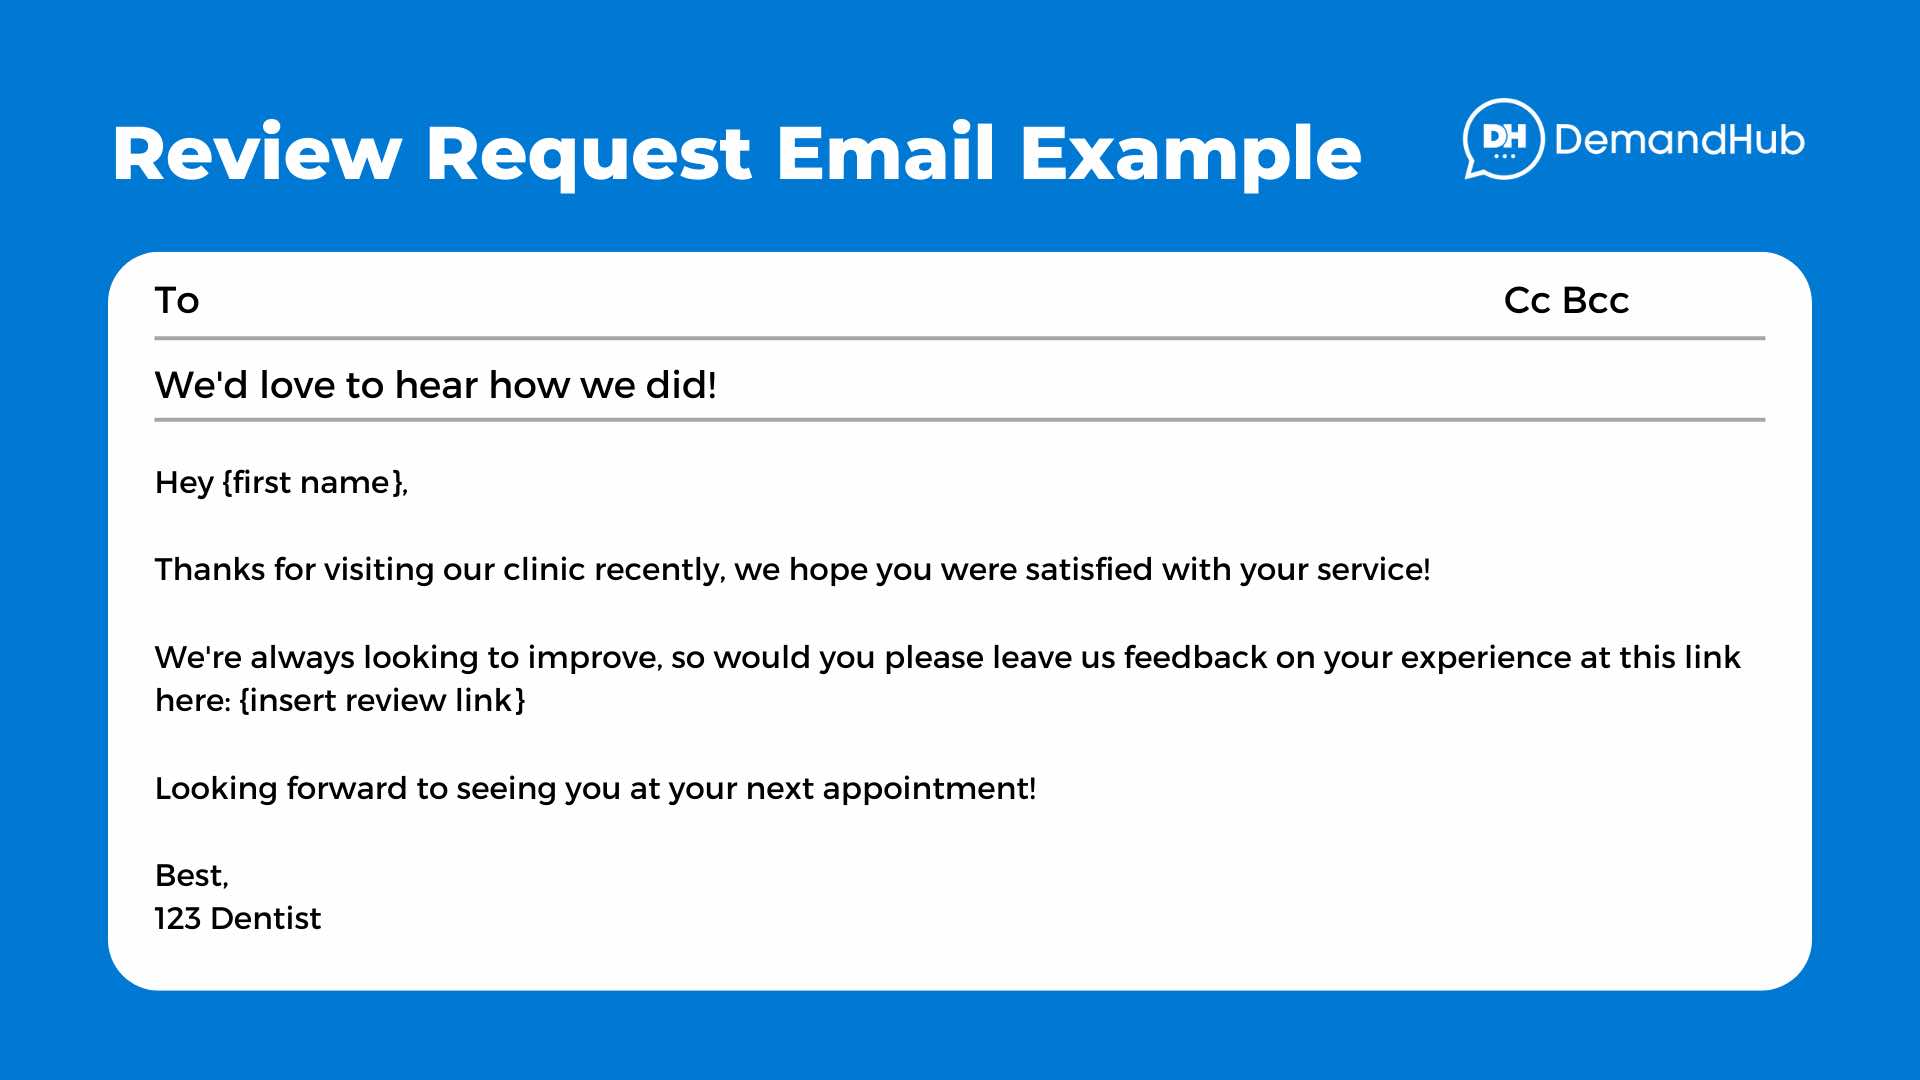 Example review request email